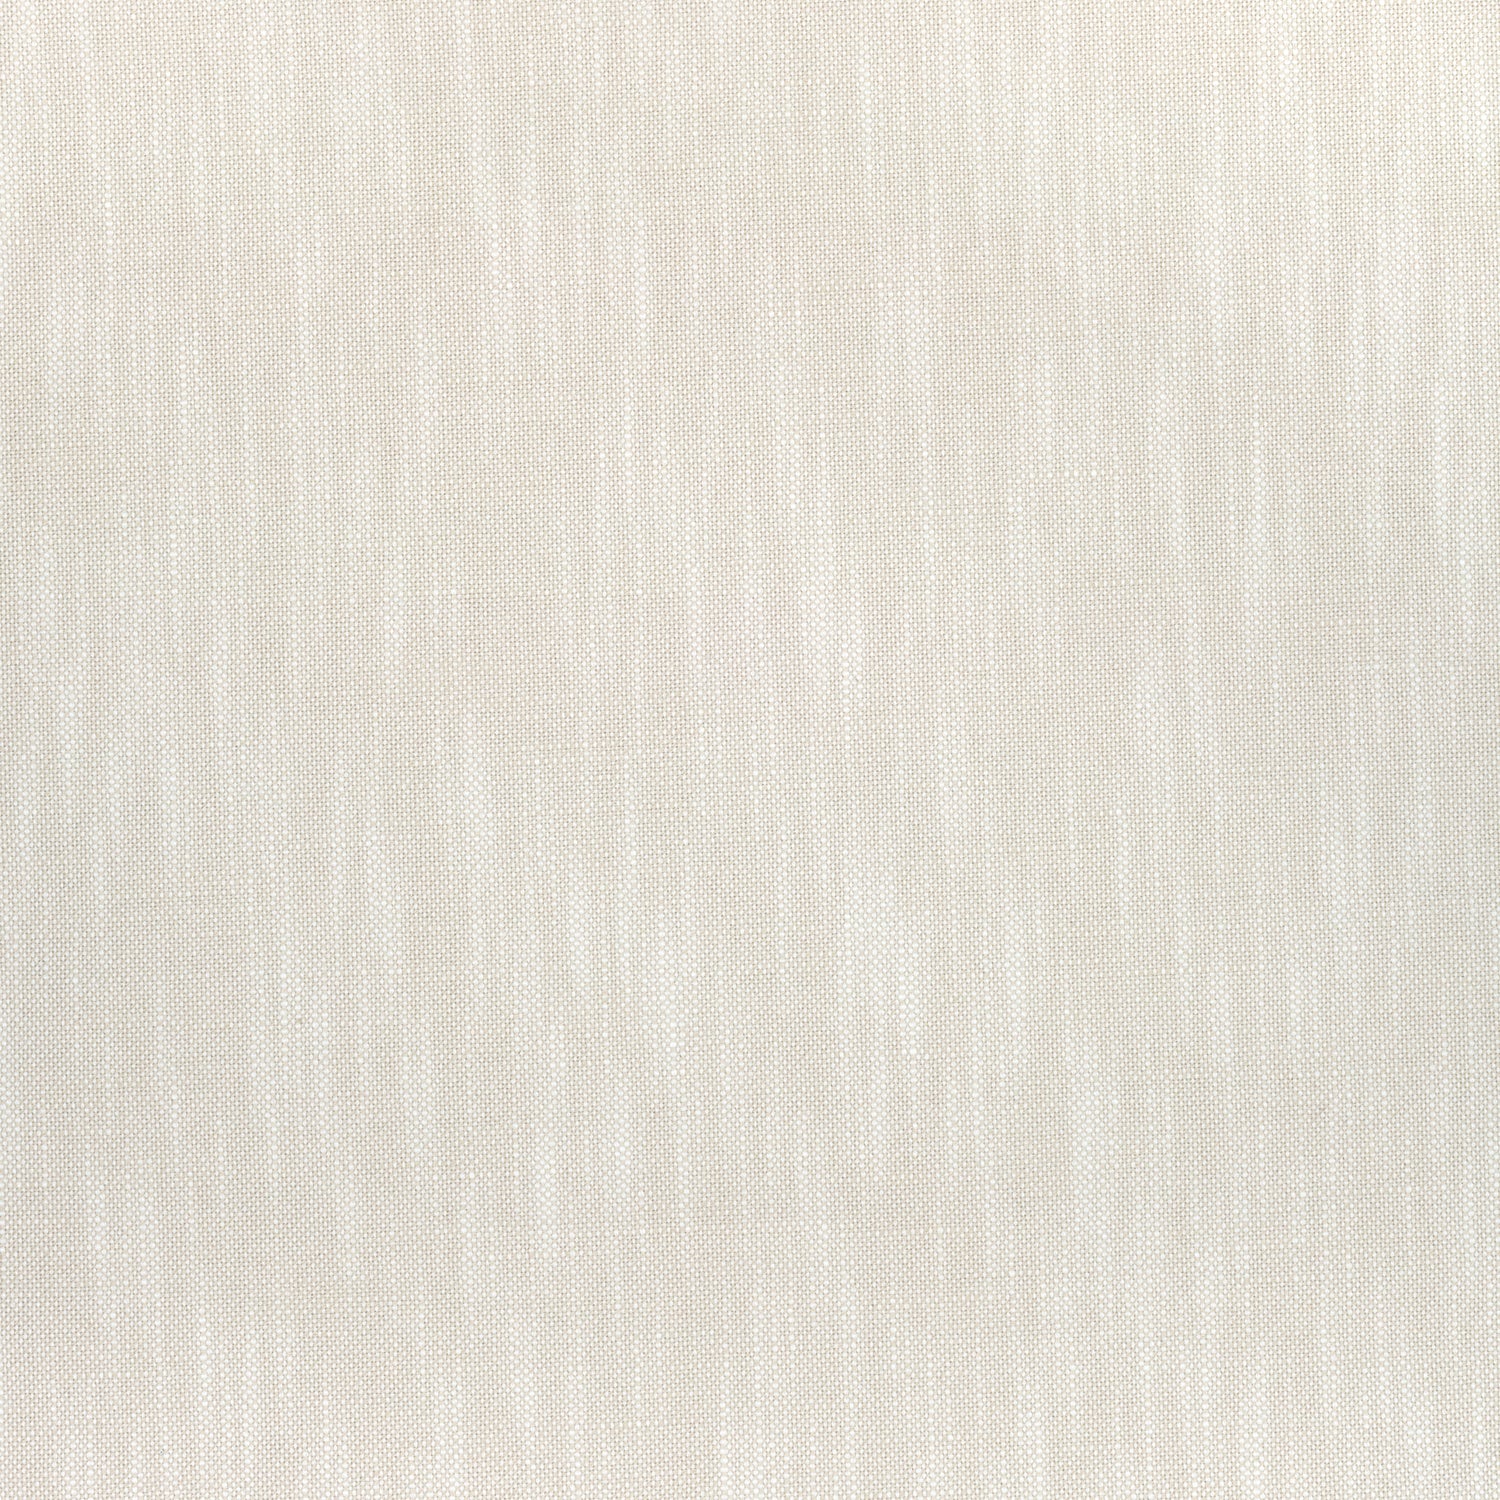 Bristol fabric in flax color - pattern number W73416 - by Thibaut in the Landmark Textures collection